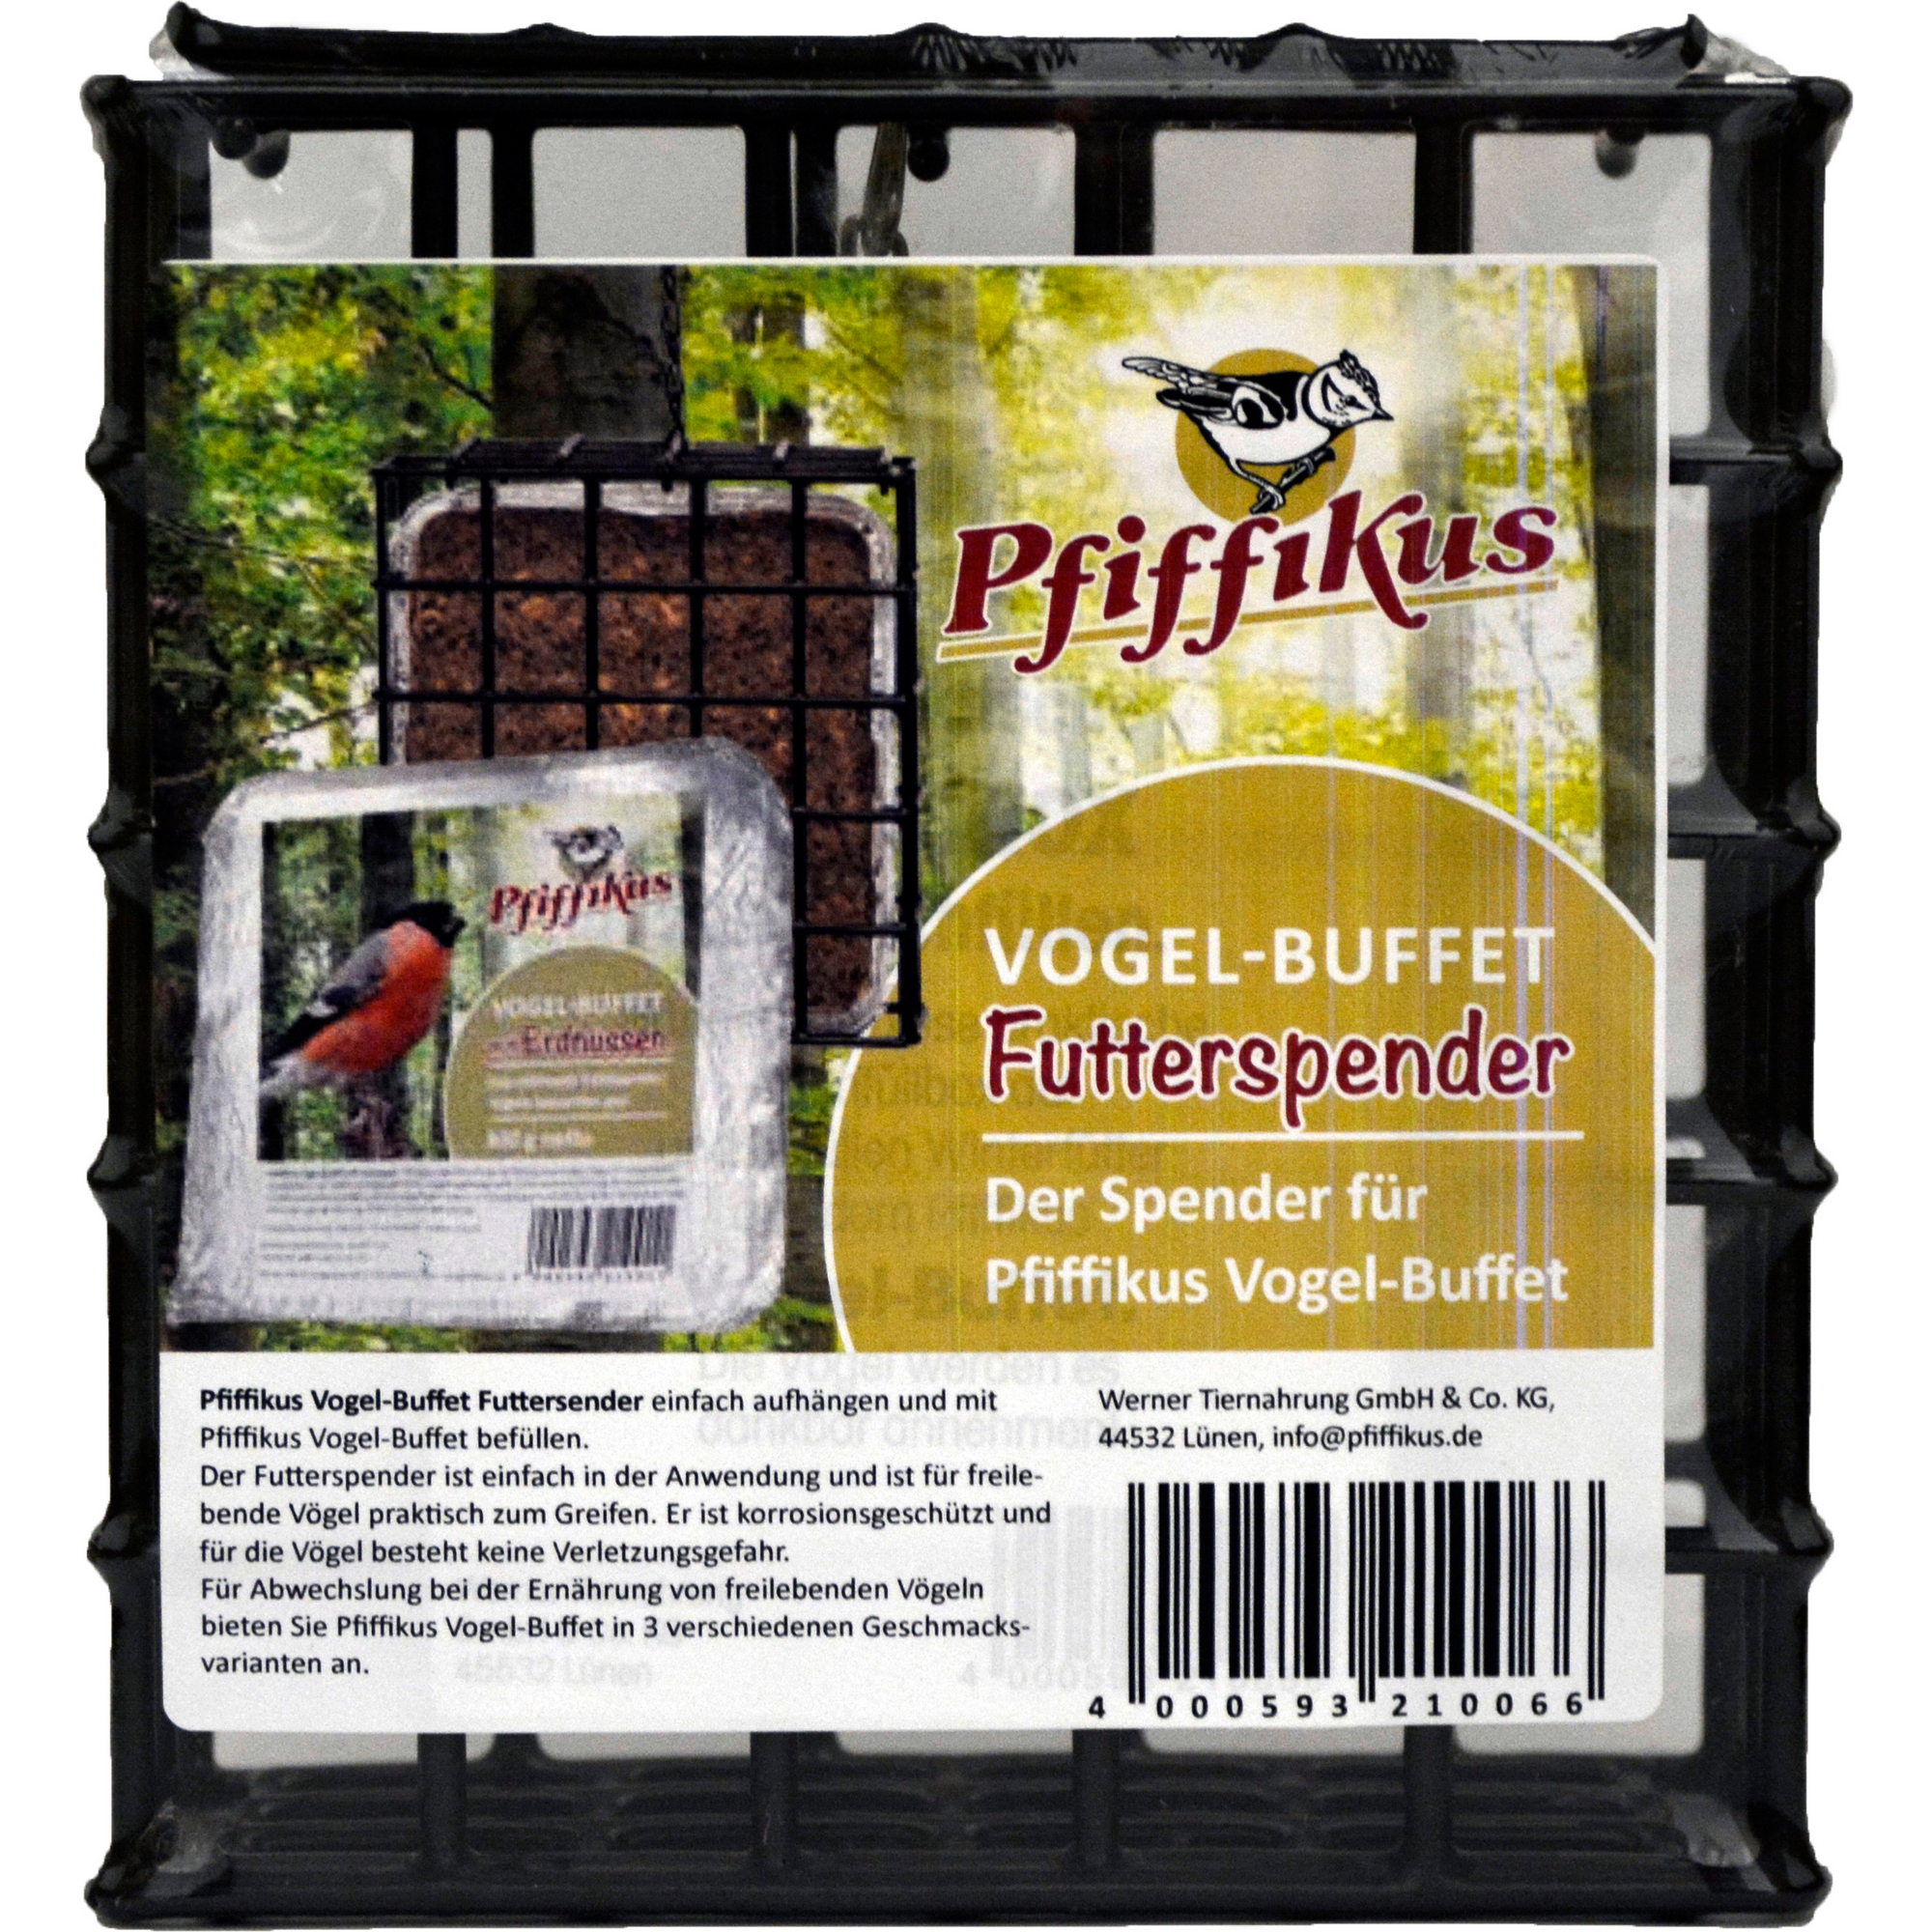 Vogel-Buffet Futterspender + product picture